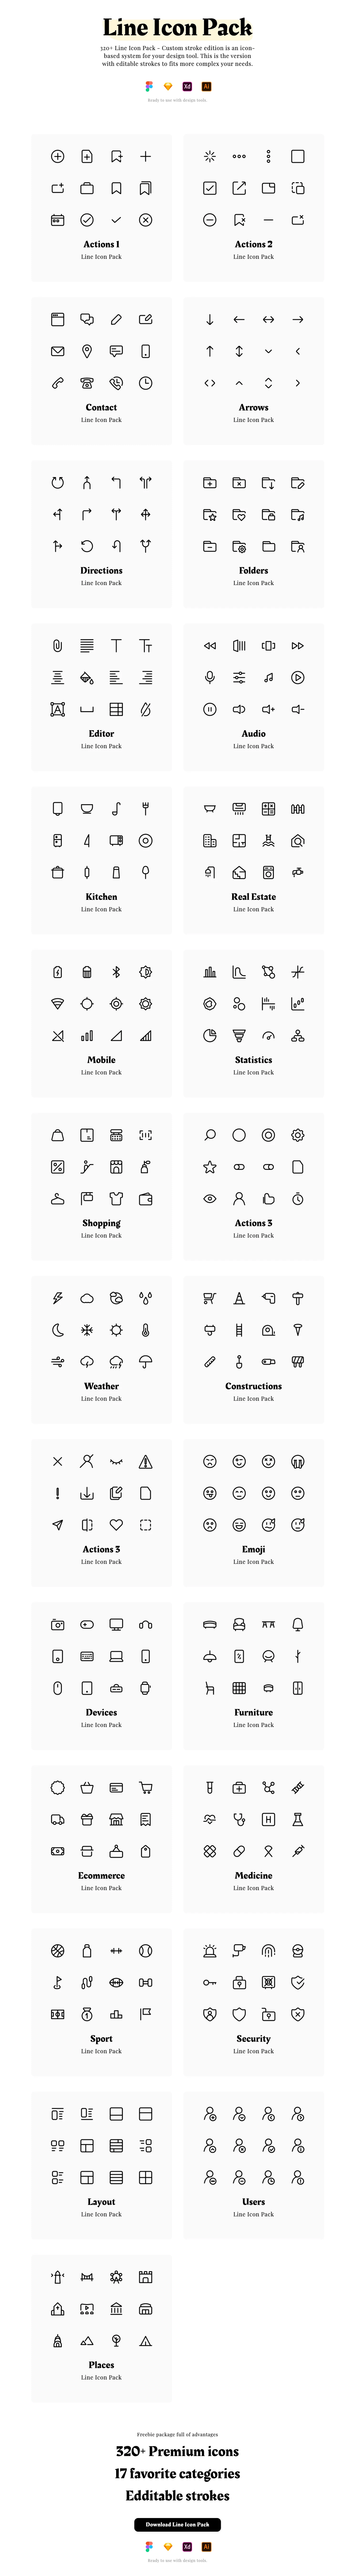 Line Free Icons Pack